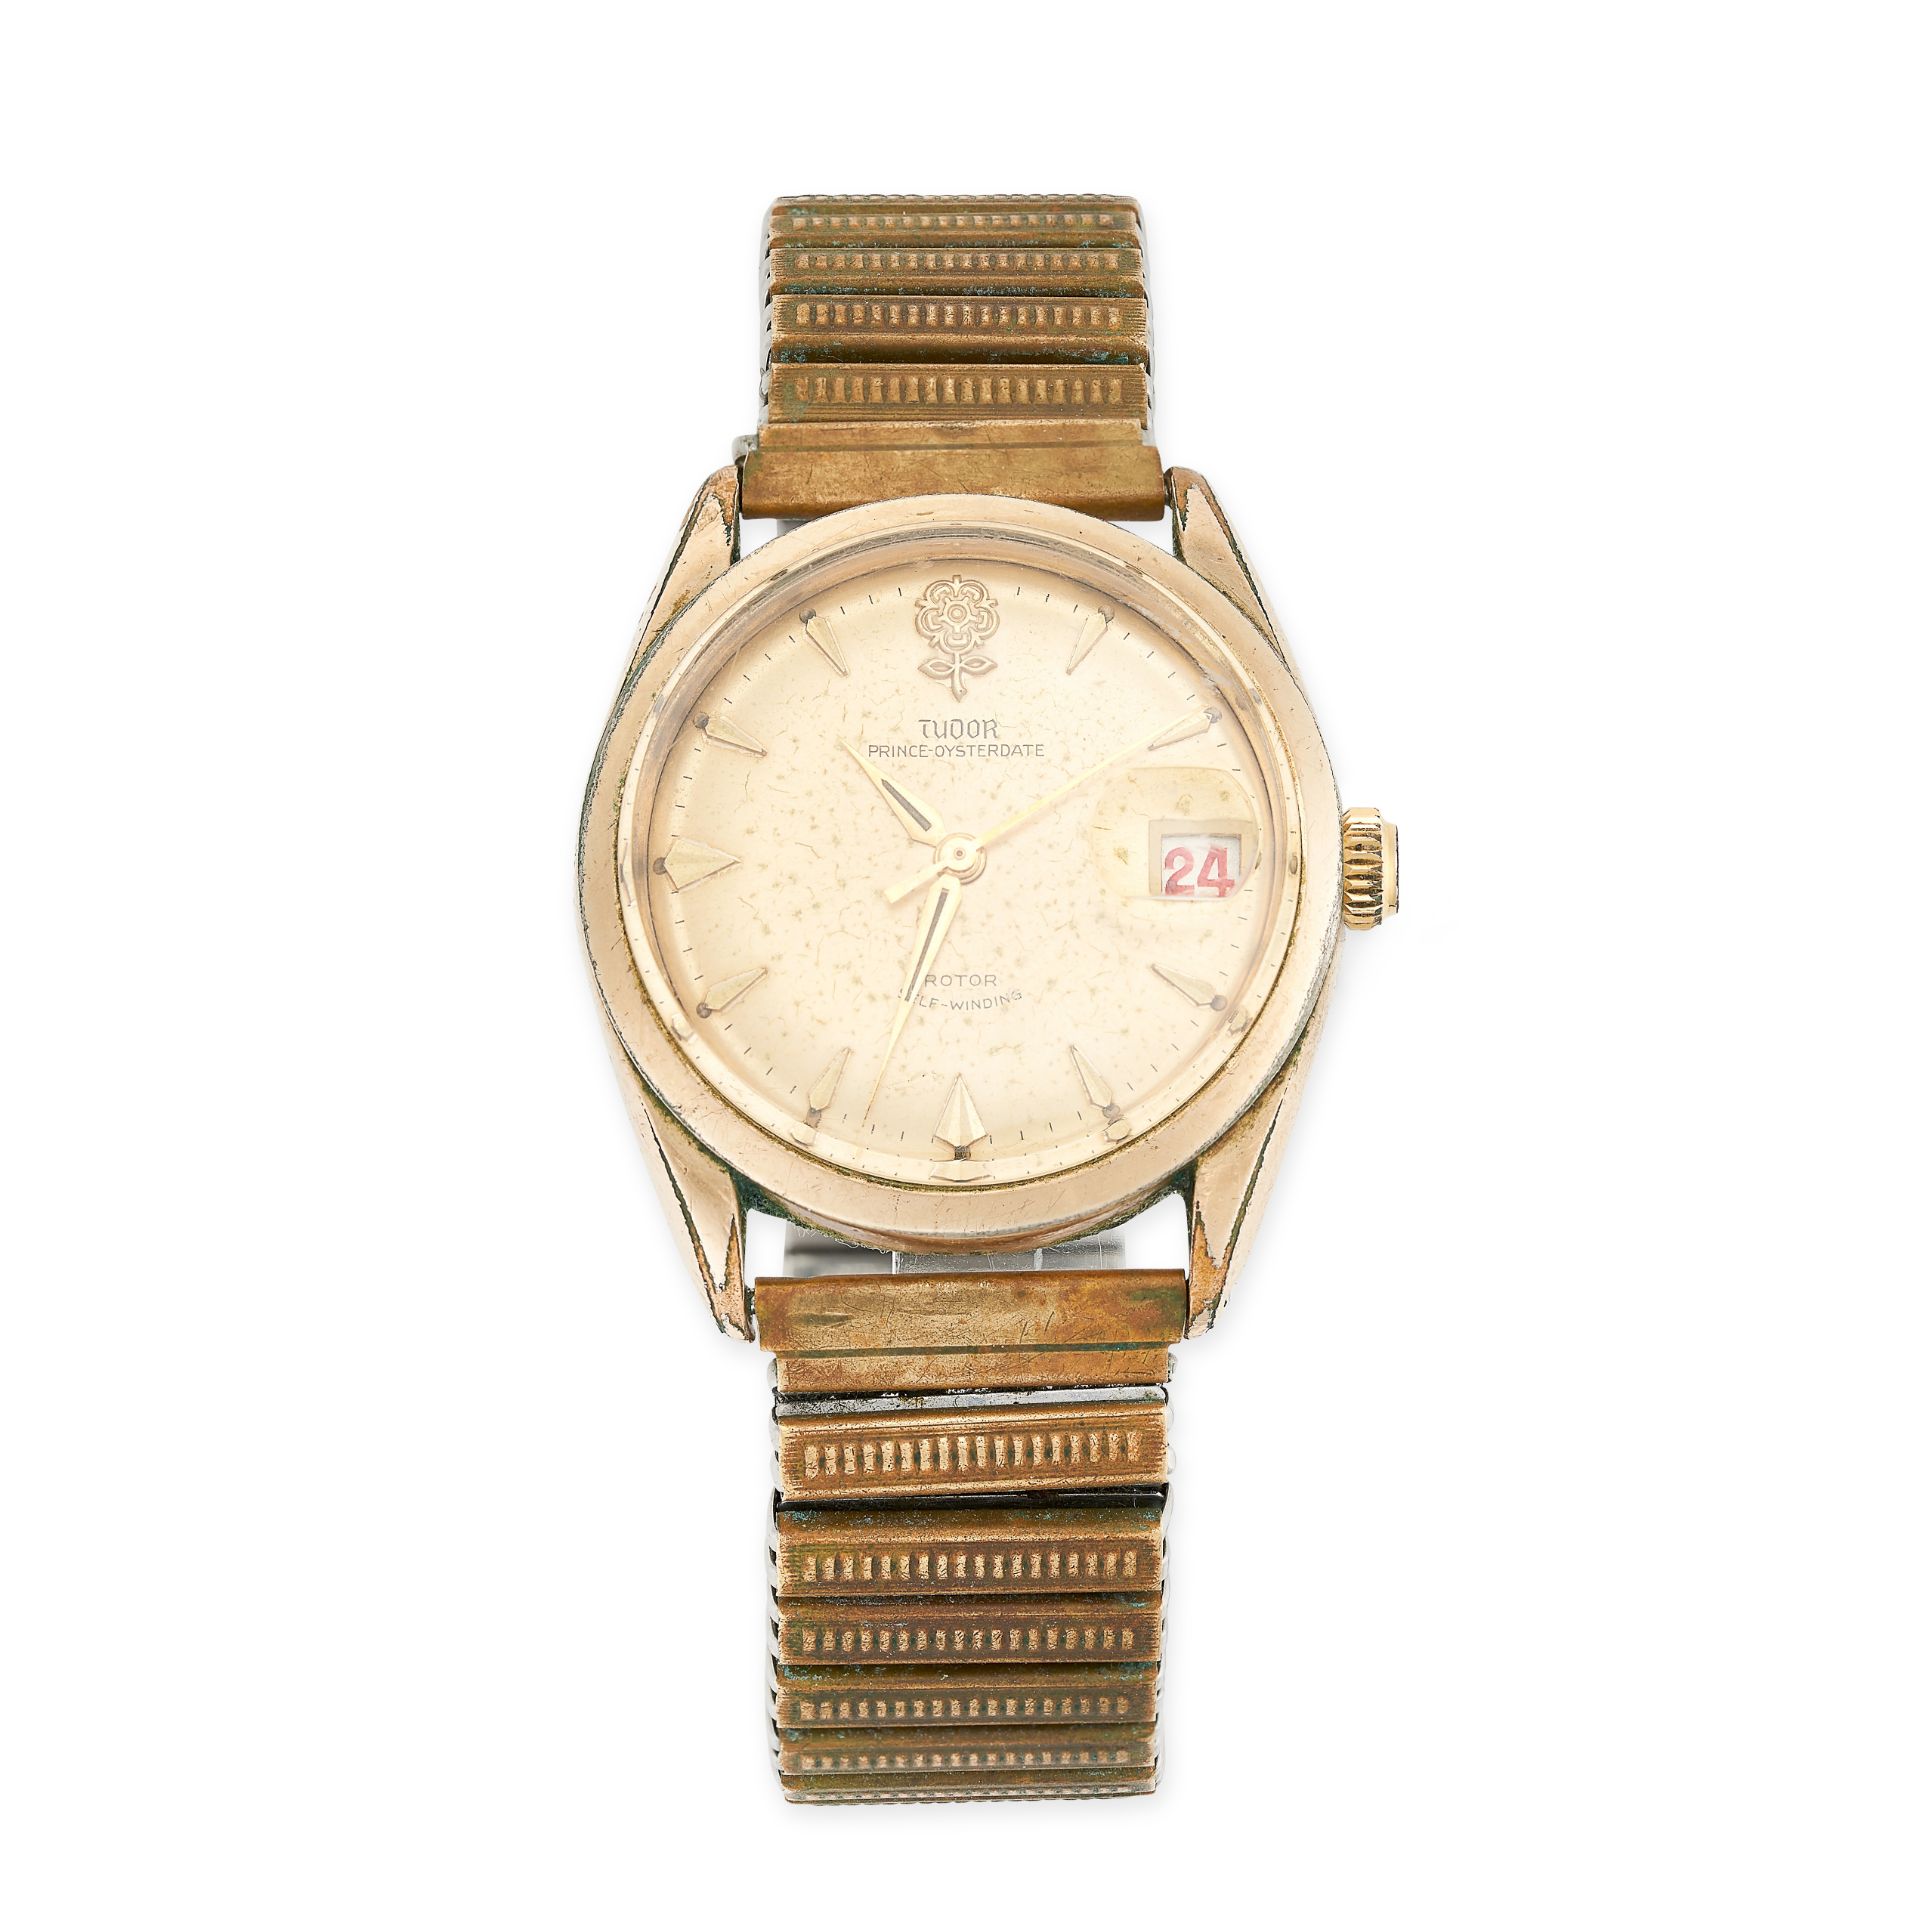 TUDOR, A PRINCE OYSTER DATE WRISTWATCH, REF. 7966, 1959, stainless steel, champagne dial with